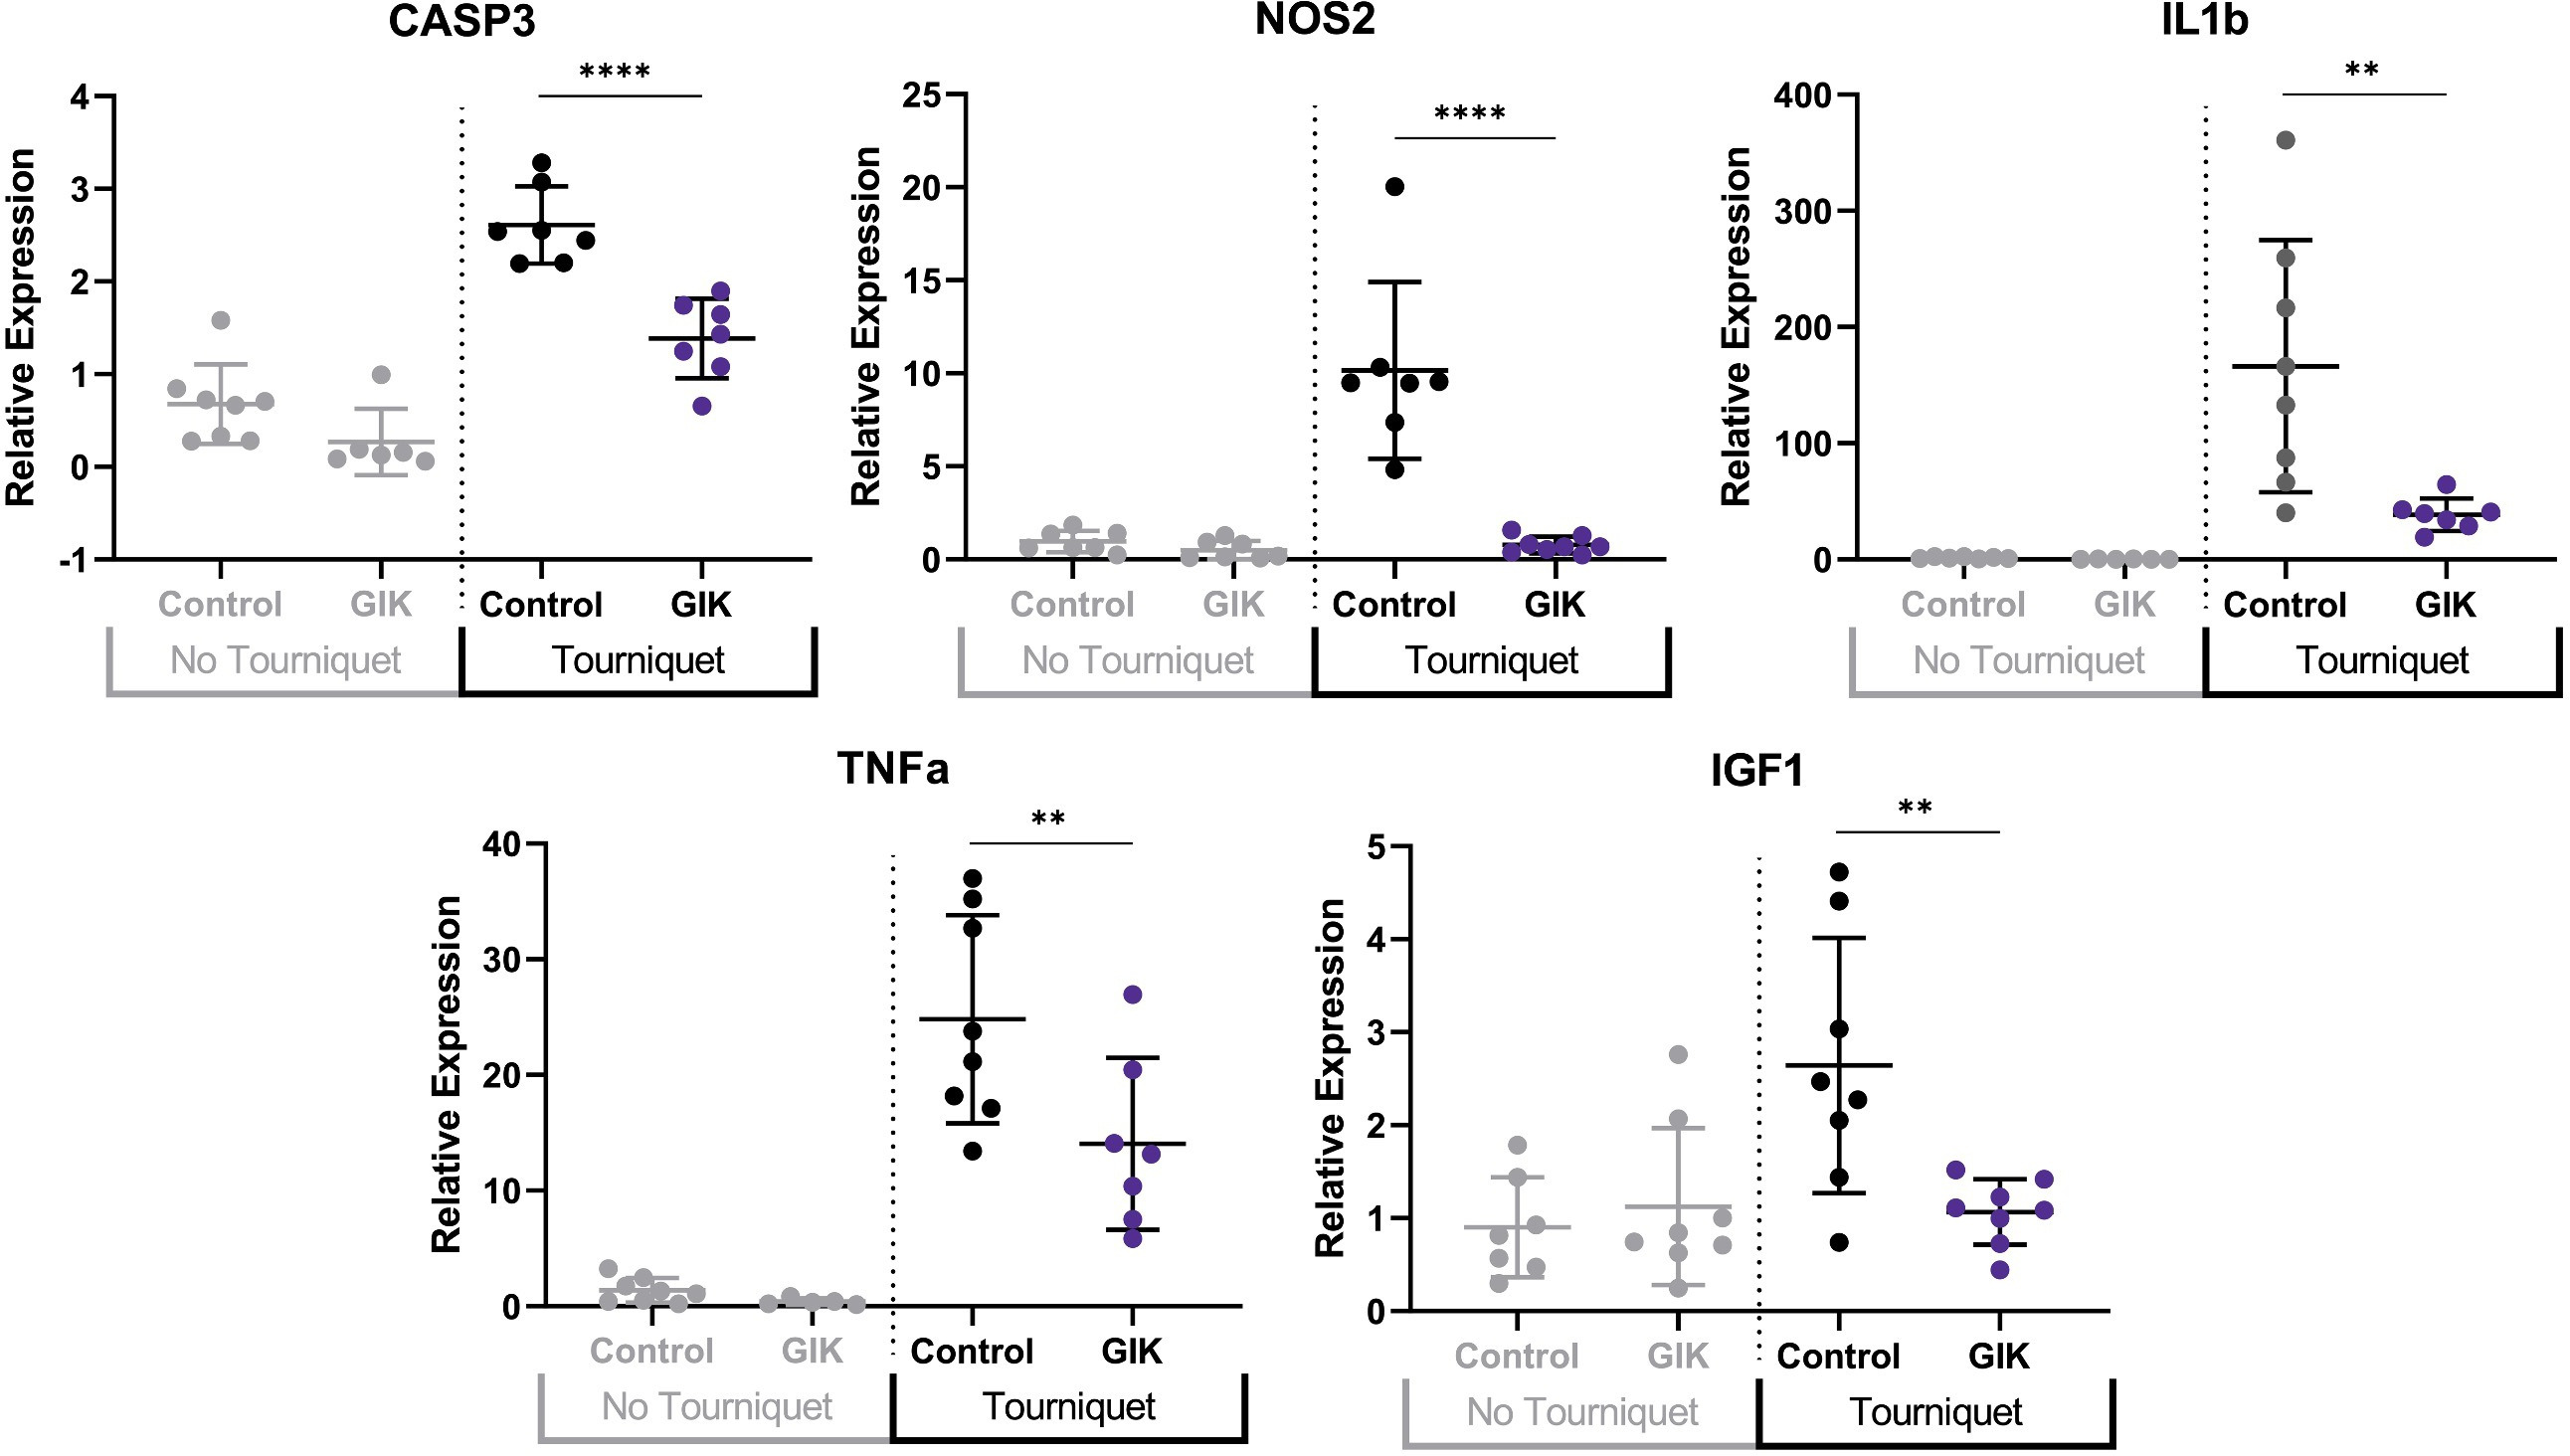 Fig. 2 
          Quantification of relative gene expression in tourniqueted peroneal muscles for the control cohort compared to the glucose-insulin-potassium (GIK) cohort demonstrating significantly greater cell death (CASP3: 2.611 (n = 7) vs 1.386 (n = 7), p < 0.001) and significantly more inflammation (nitric oxide synthase 2 (NOS2): 10.150 (n = 7) vs 0.772 (n = 7), p < 0.001; interleukin-1 beta (IL-1ß): 166.300 (n = 8) vs 38.500 (n = 7), p = 0.002; tumour necrosis factor alpha (TNF-a): 24.820 (n = 8) vs 14.060 (n = 7), p = 0.010; insulin-like growth factor 1 (IGF1): 2.643 (n = 8) vs 1.066 (n = 8), p = 0.007, one-way analysis of variance with Tukey’s multiple comparisons). **p ≤ 0.01; ****p ≤ 0.001.
        